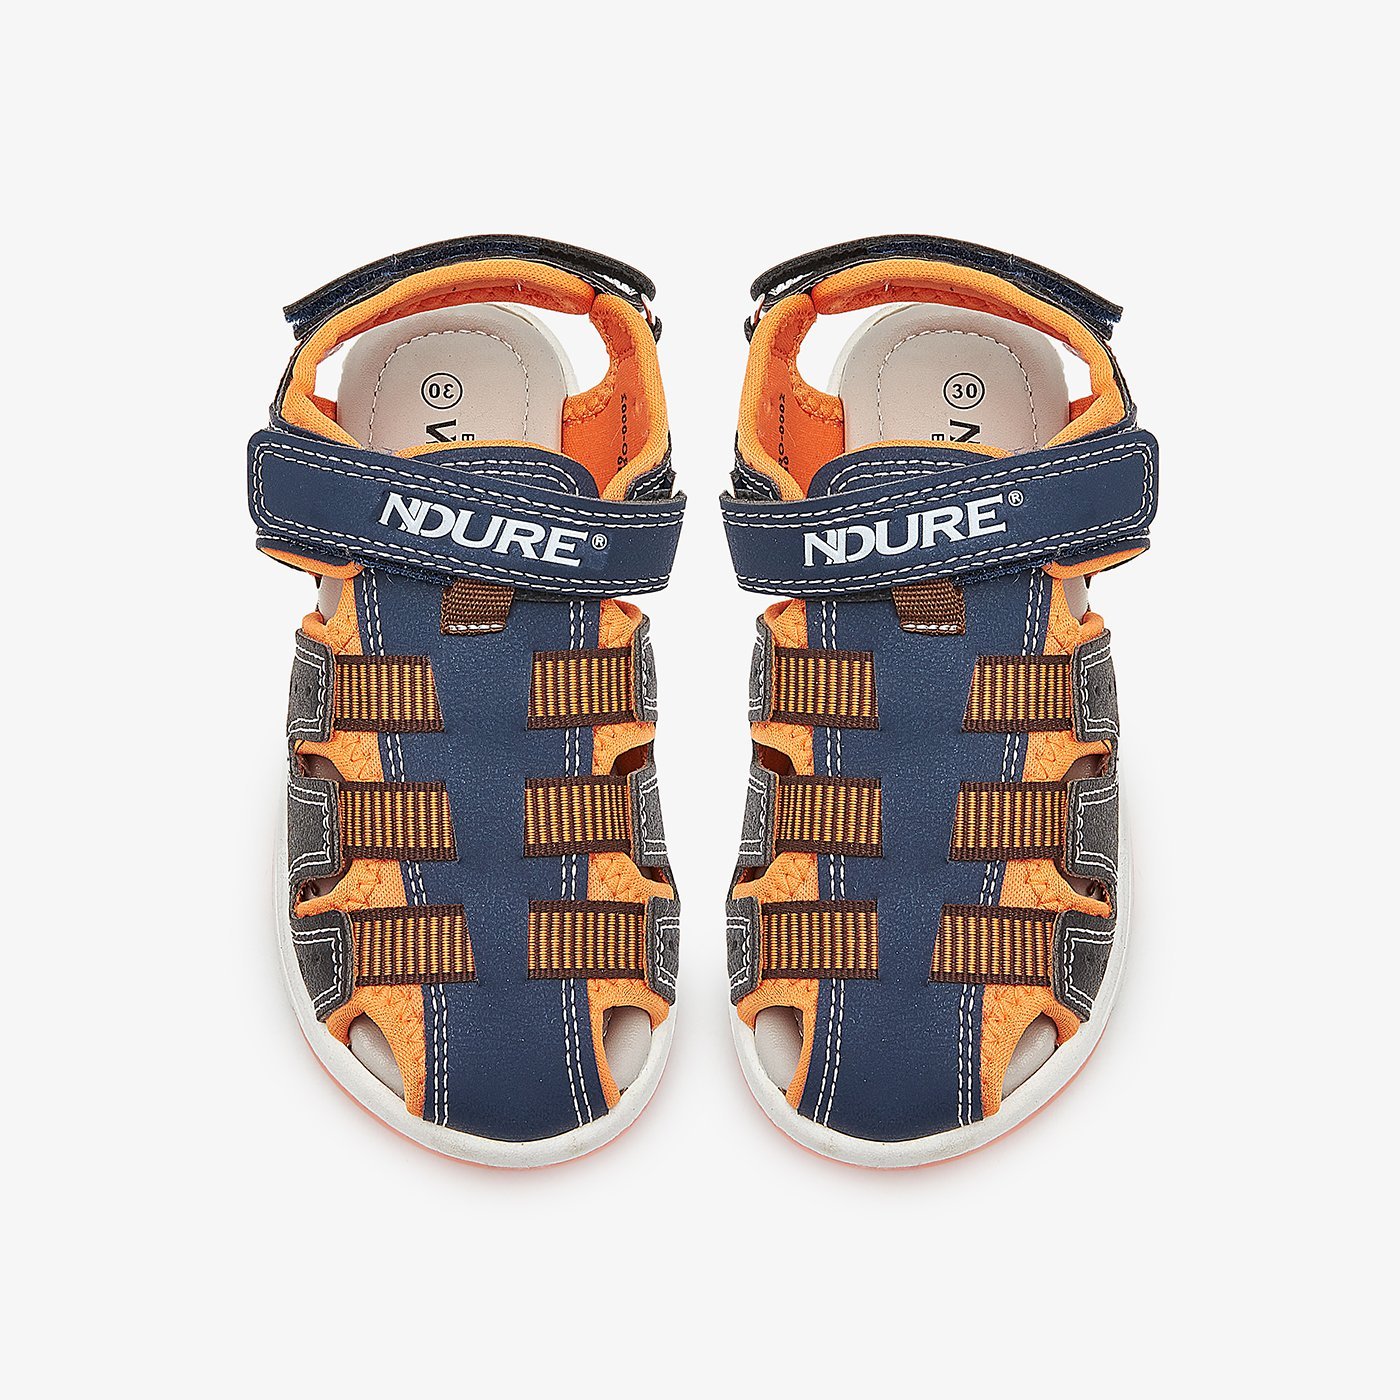 Cage boys sandals